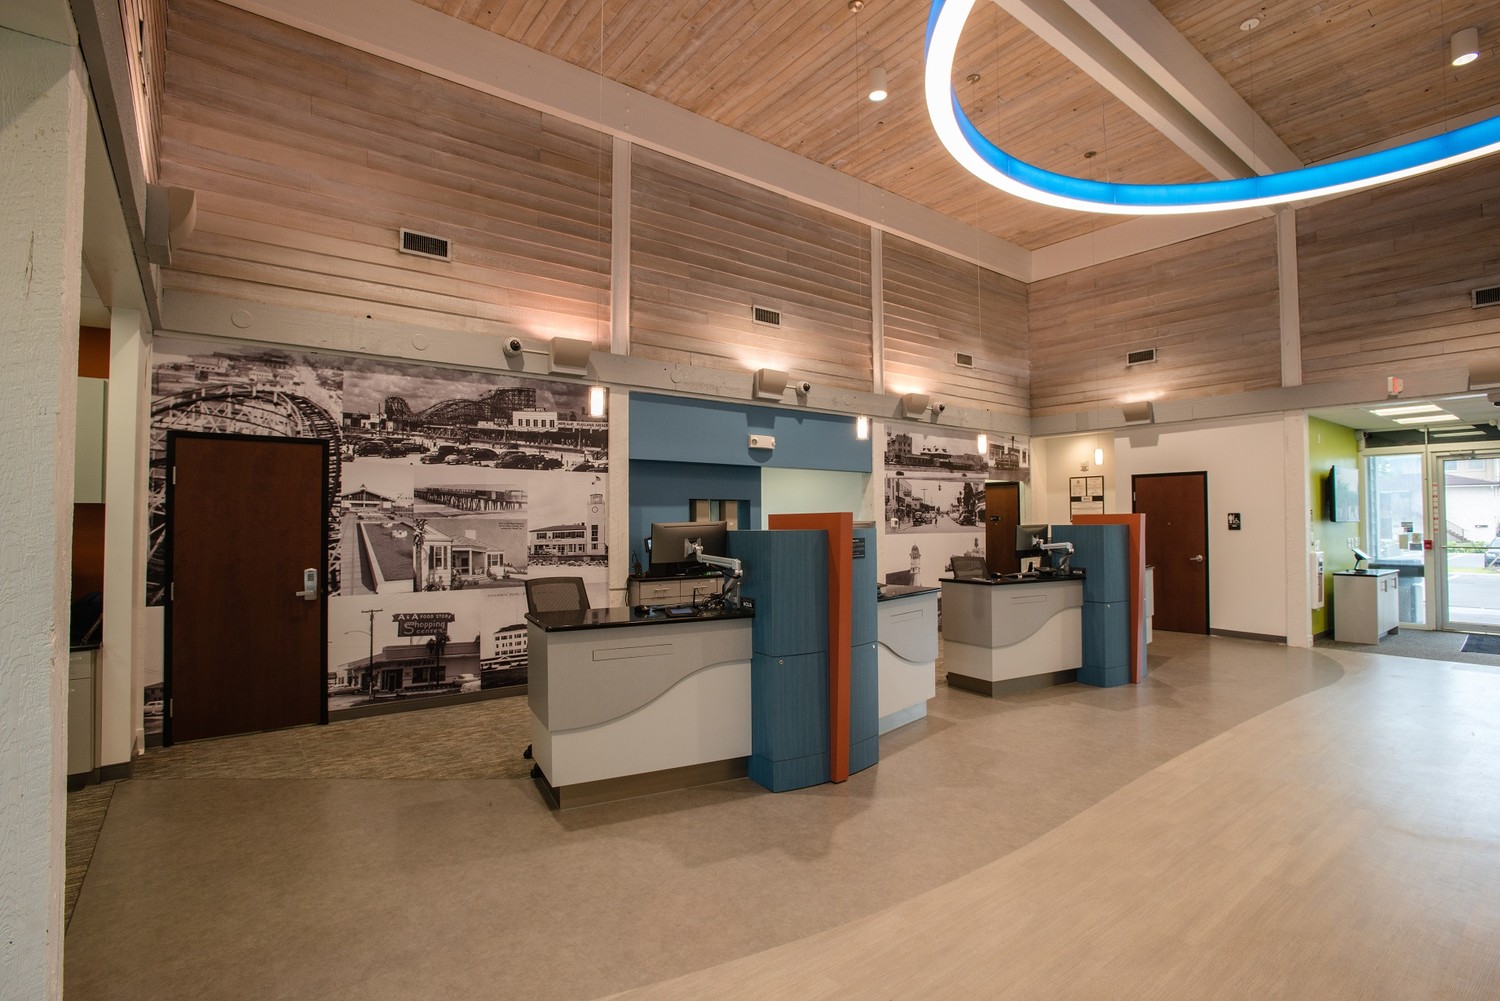 The new interior design of Community First Credit Union’s Beaches Branch features modern bright colors, furniture and finishes, along with a mix of carpet and solid flooring and surfaces, most of which are sustainable or recycled.